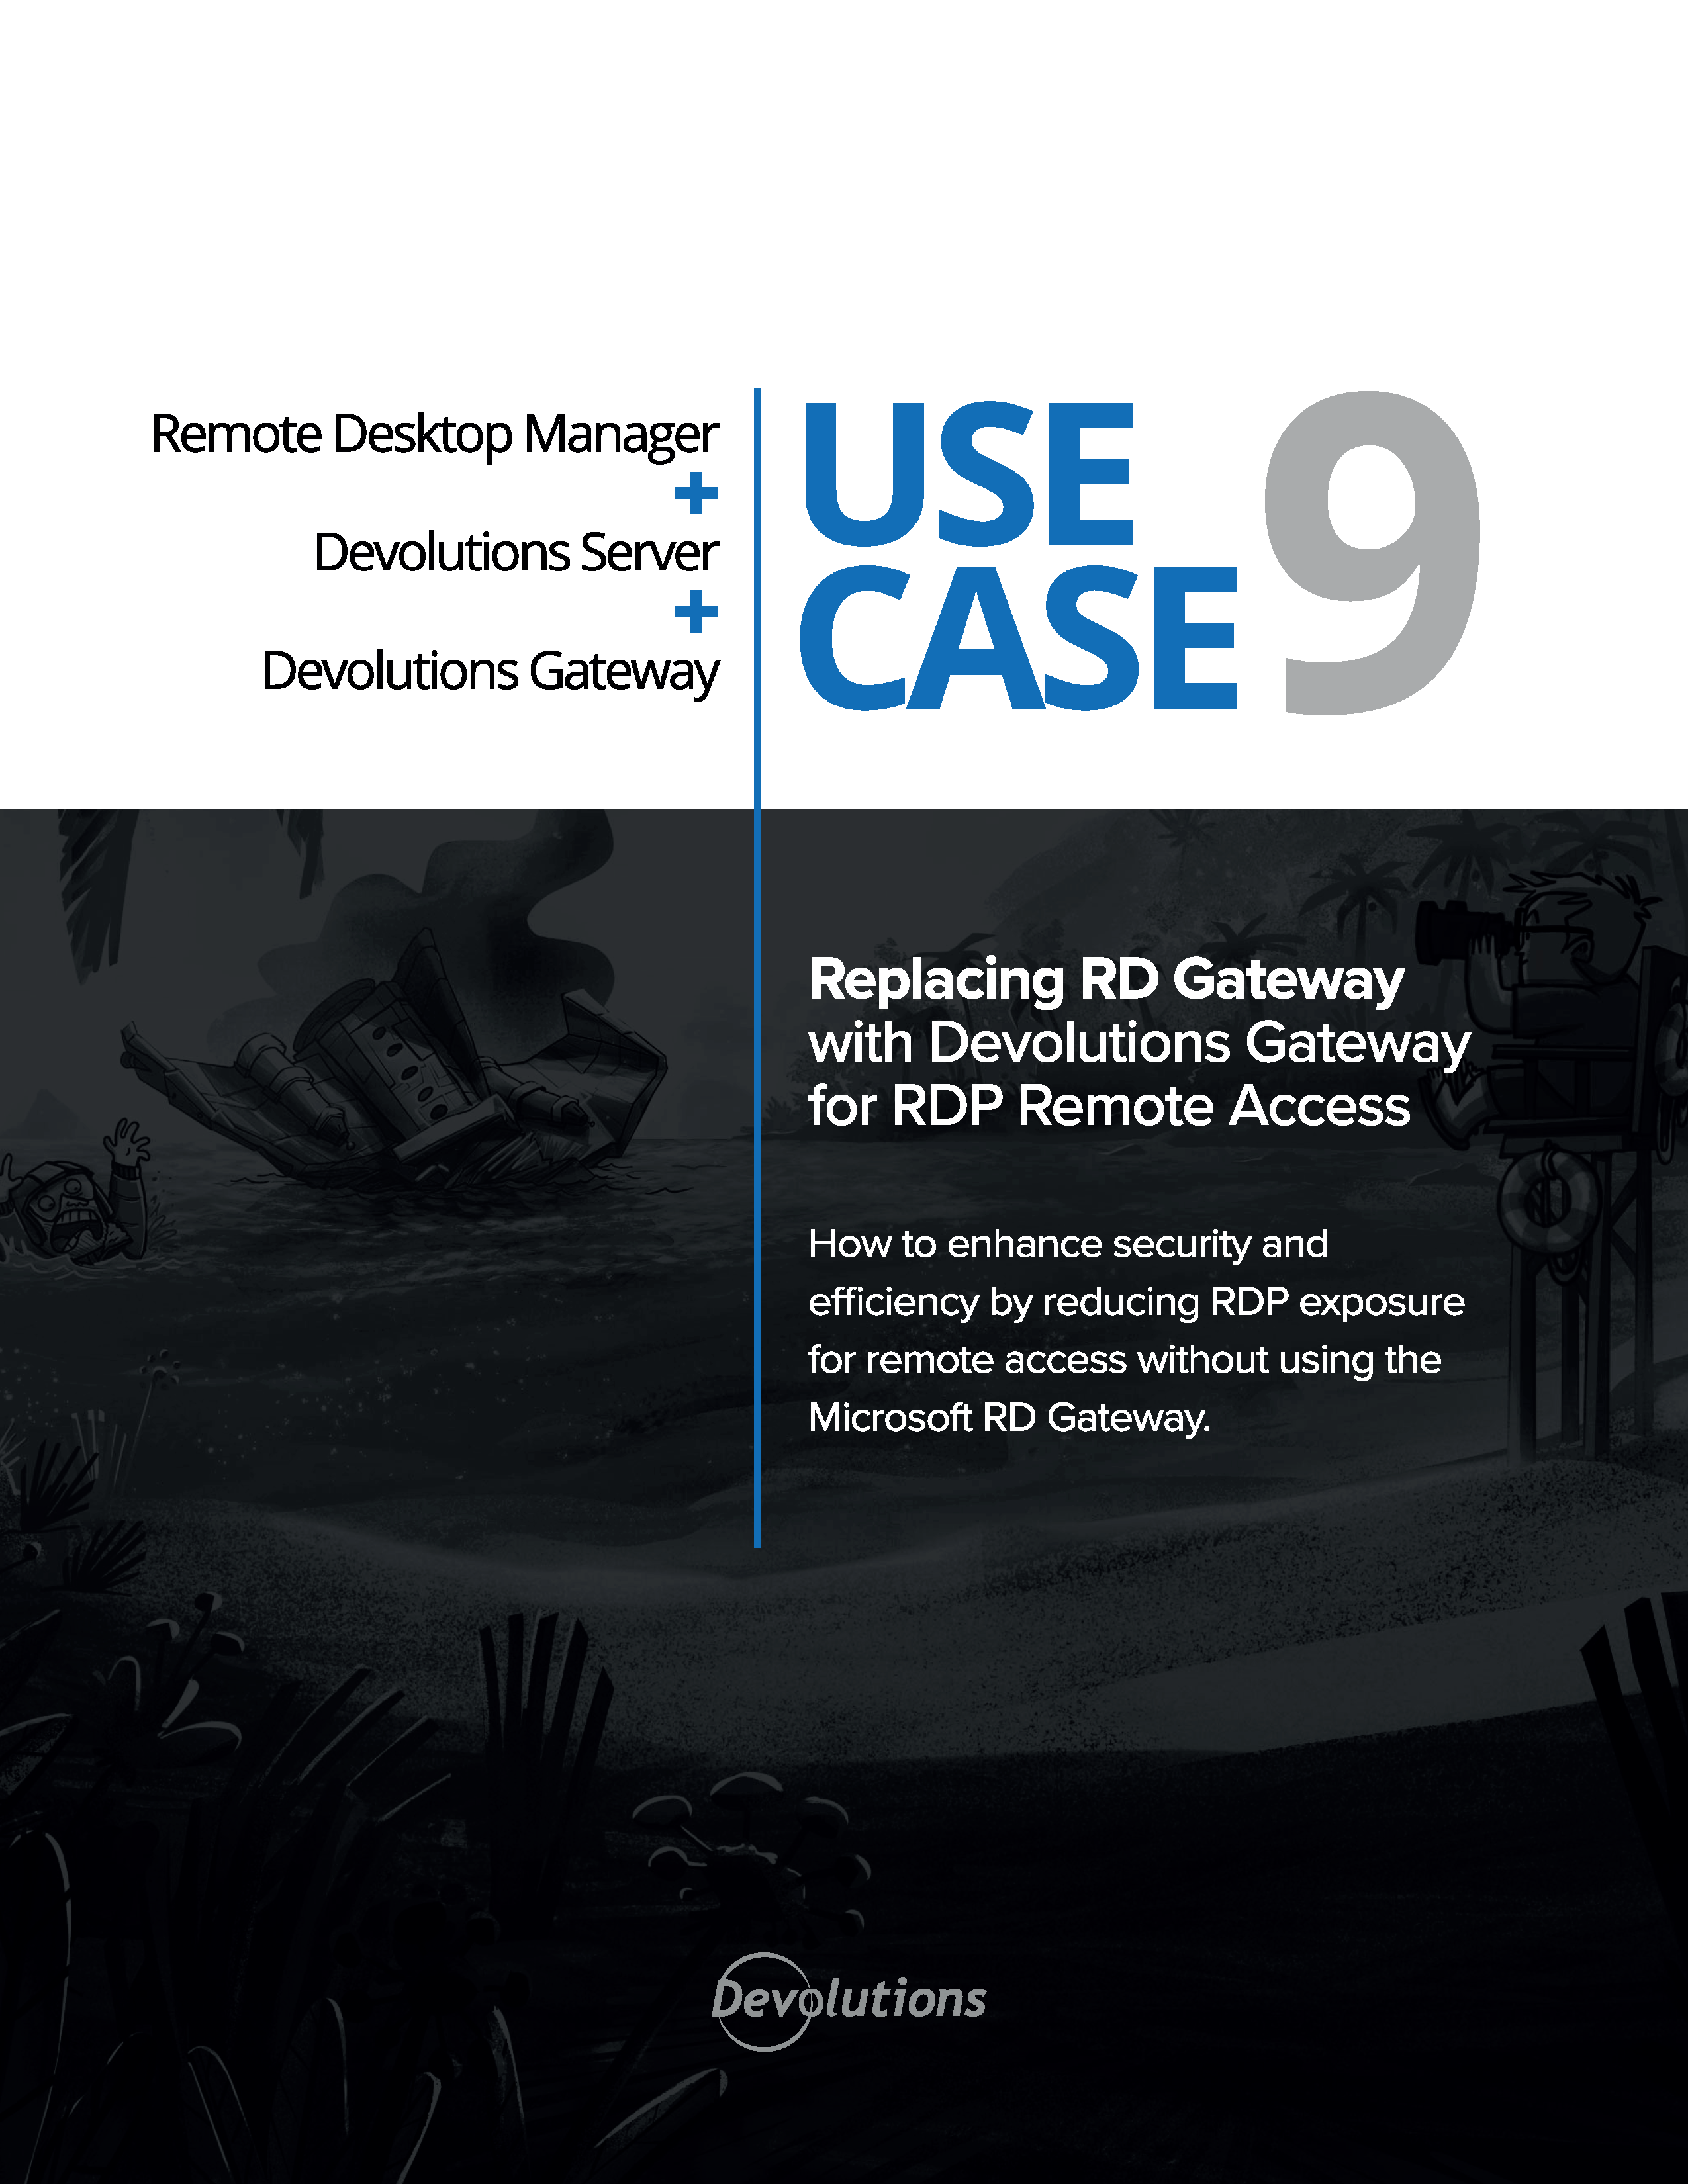 Devolutions Server Control Access to Critical Assets with Role-Based Access Control